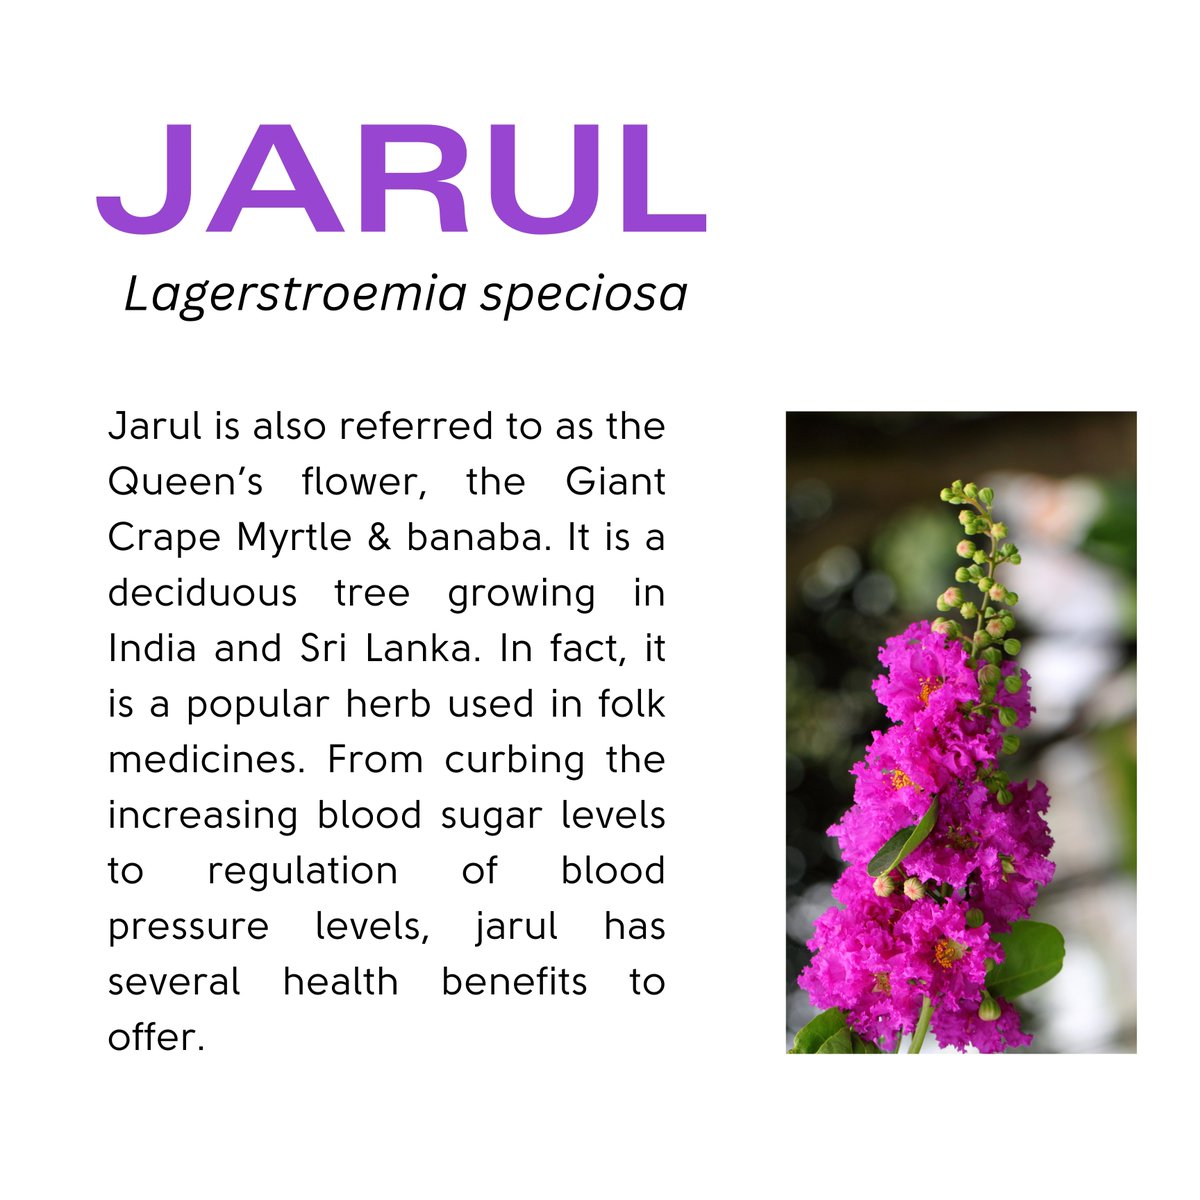 Flora:- #03
Jarul has a strong impact on reducing cholesterol and triglyceride levels, thereby shielding the heart from arteriosclerosis & myocardial infarction.

#Wildflora 
#flower
#wild
#forest

@moefcc @ntca_india @UpforestUp @ifs_lalit @raju2179